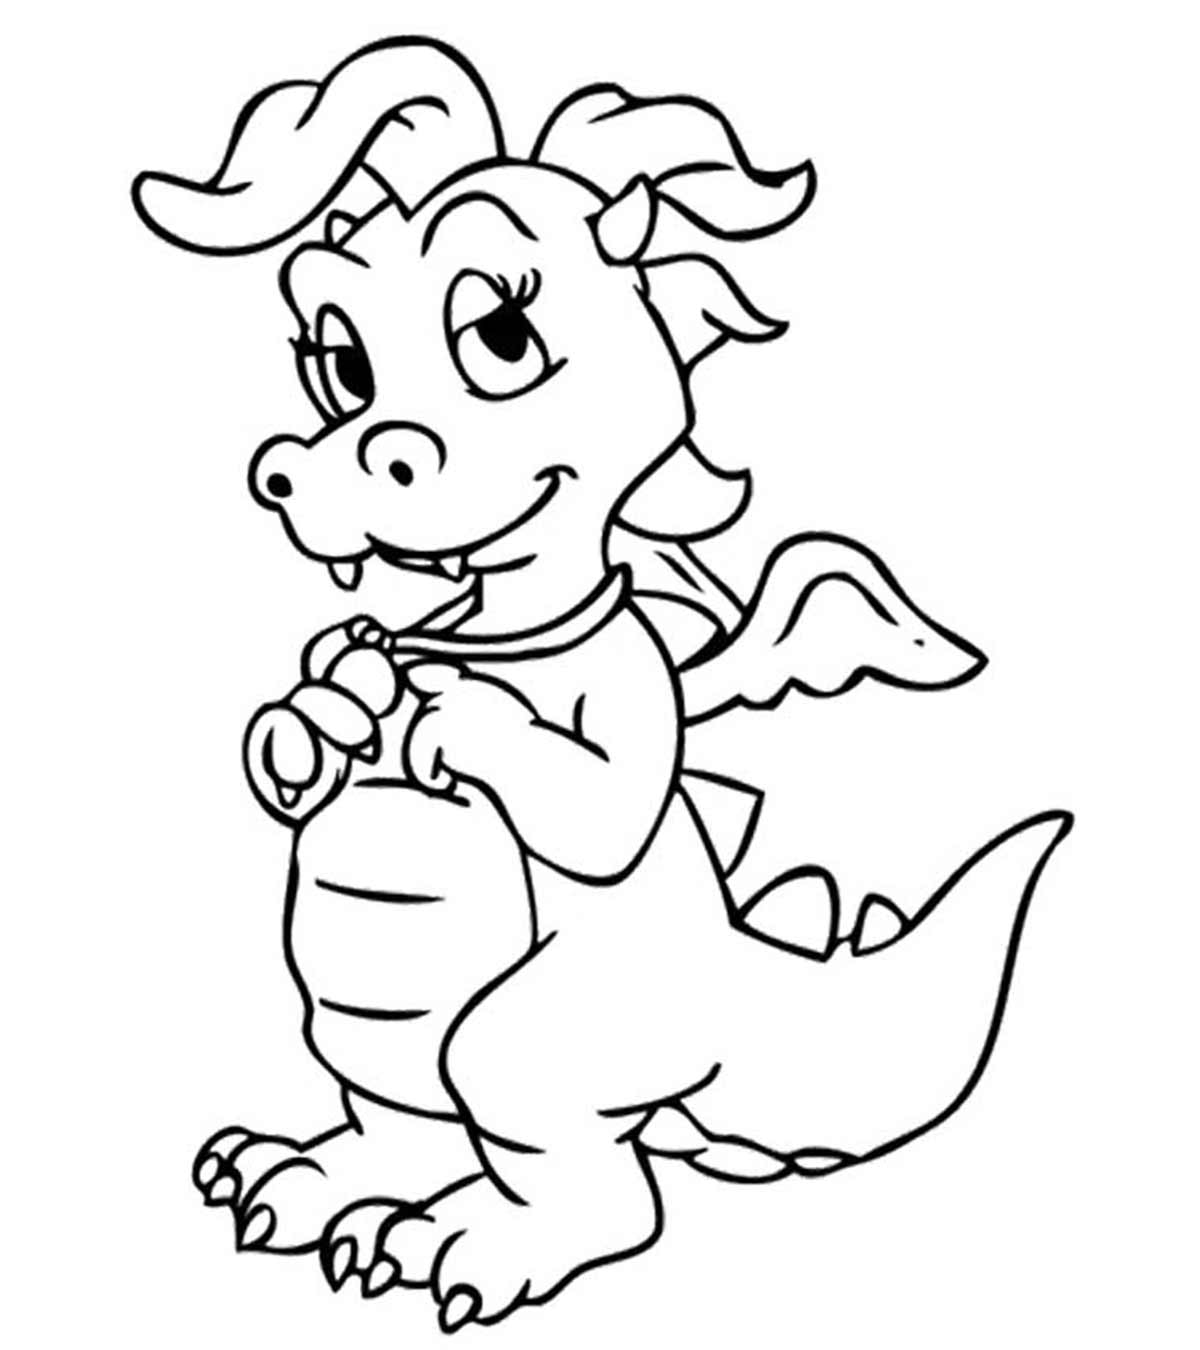 Top 25 Dragon Tales Coloring Pages Your Toddler Will Love